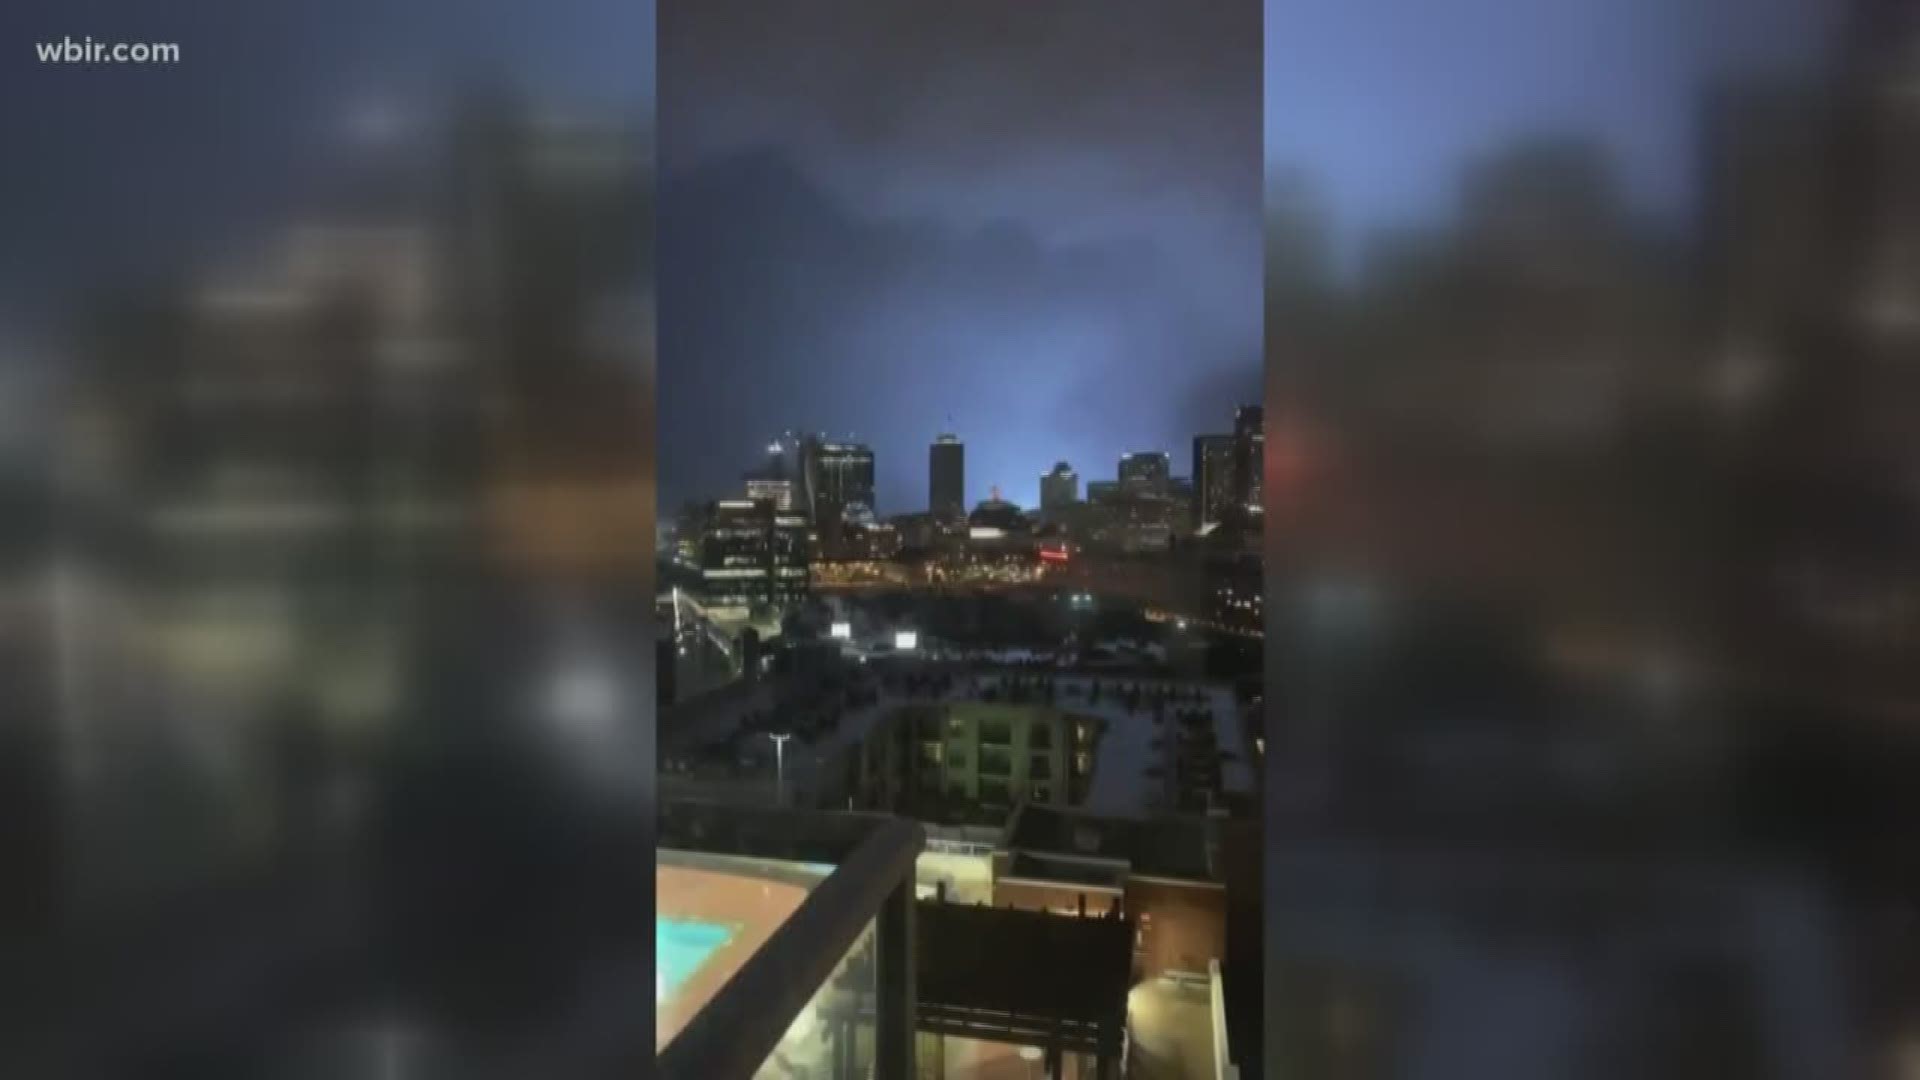 Two deadly tornadoes moved through the Nashville area early Tuesday morning.